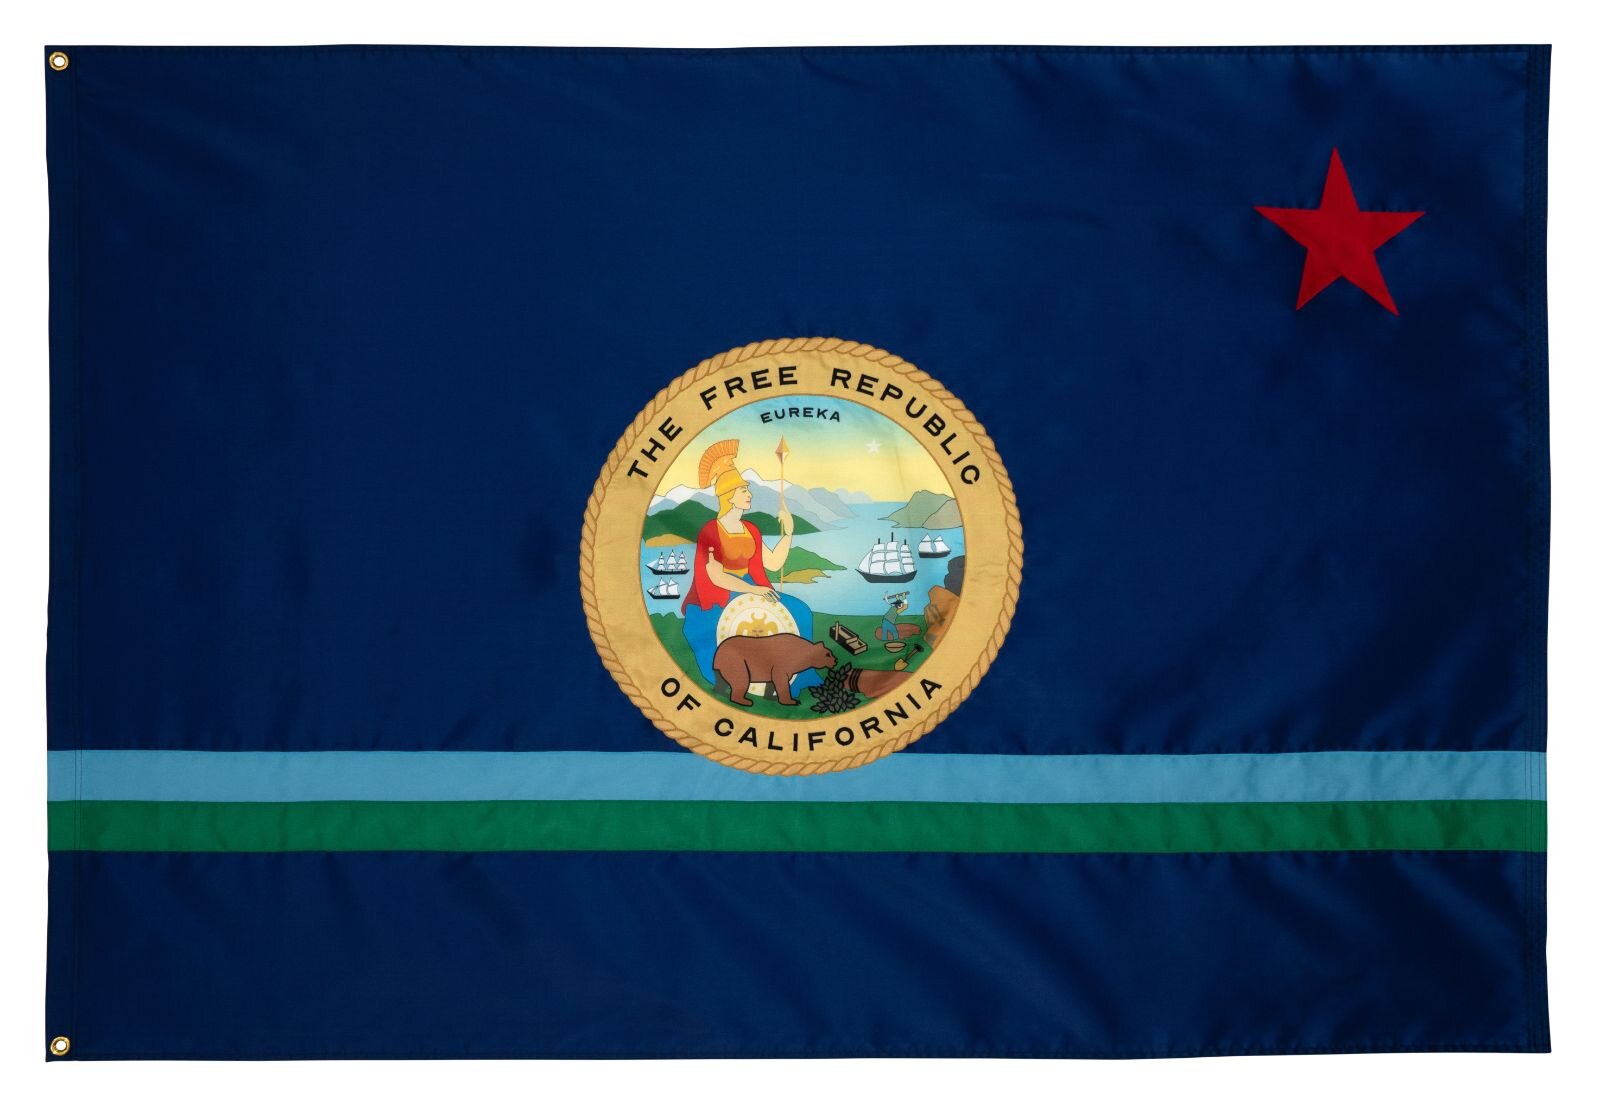  Cole Sternberg  the official flag of the free republic of california,  2020 Ink and stitched applique nylon 48” x 72” 